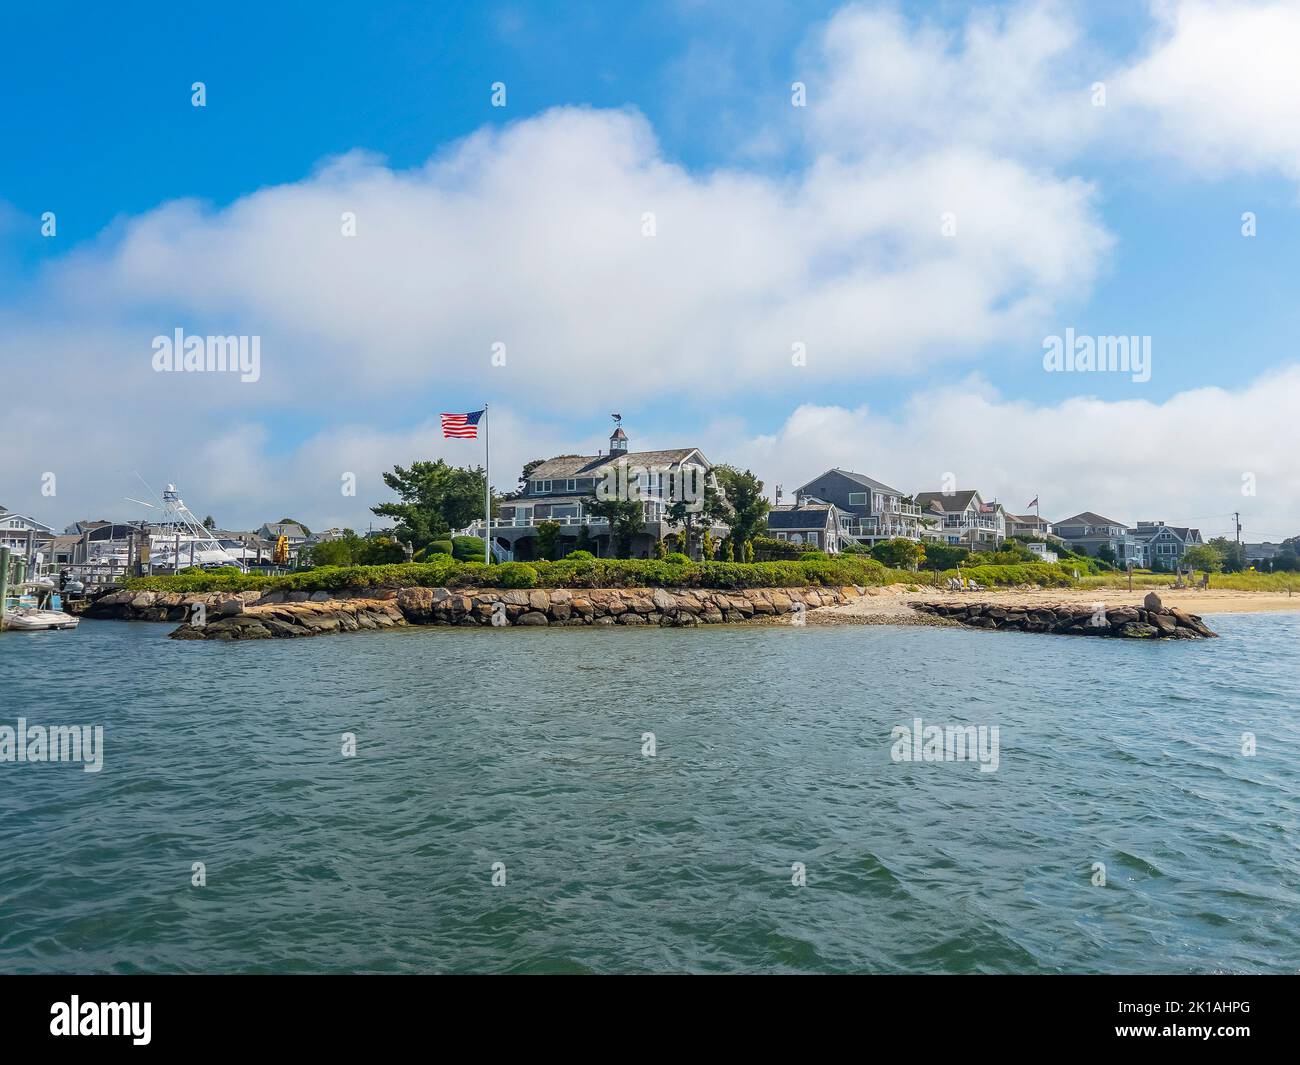 Historic waterfront houses at Lewis Bay in village of Hyannis, town of Barnstable, Cape Cod, Massachusetts MA, USA. Stock Photo